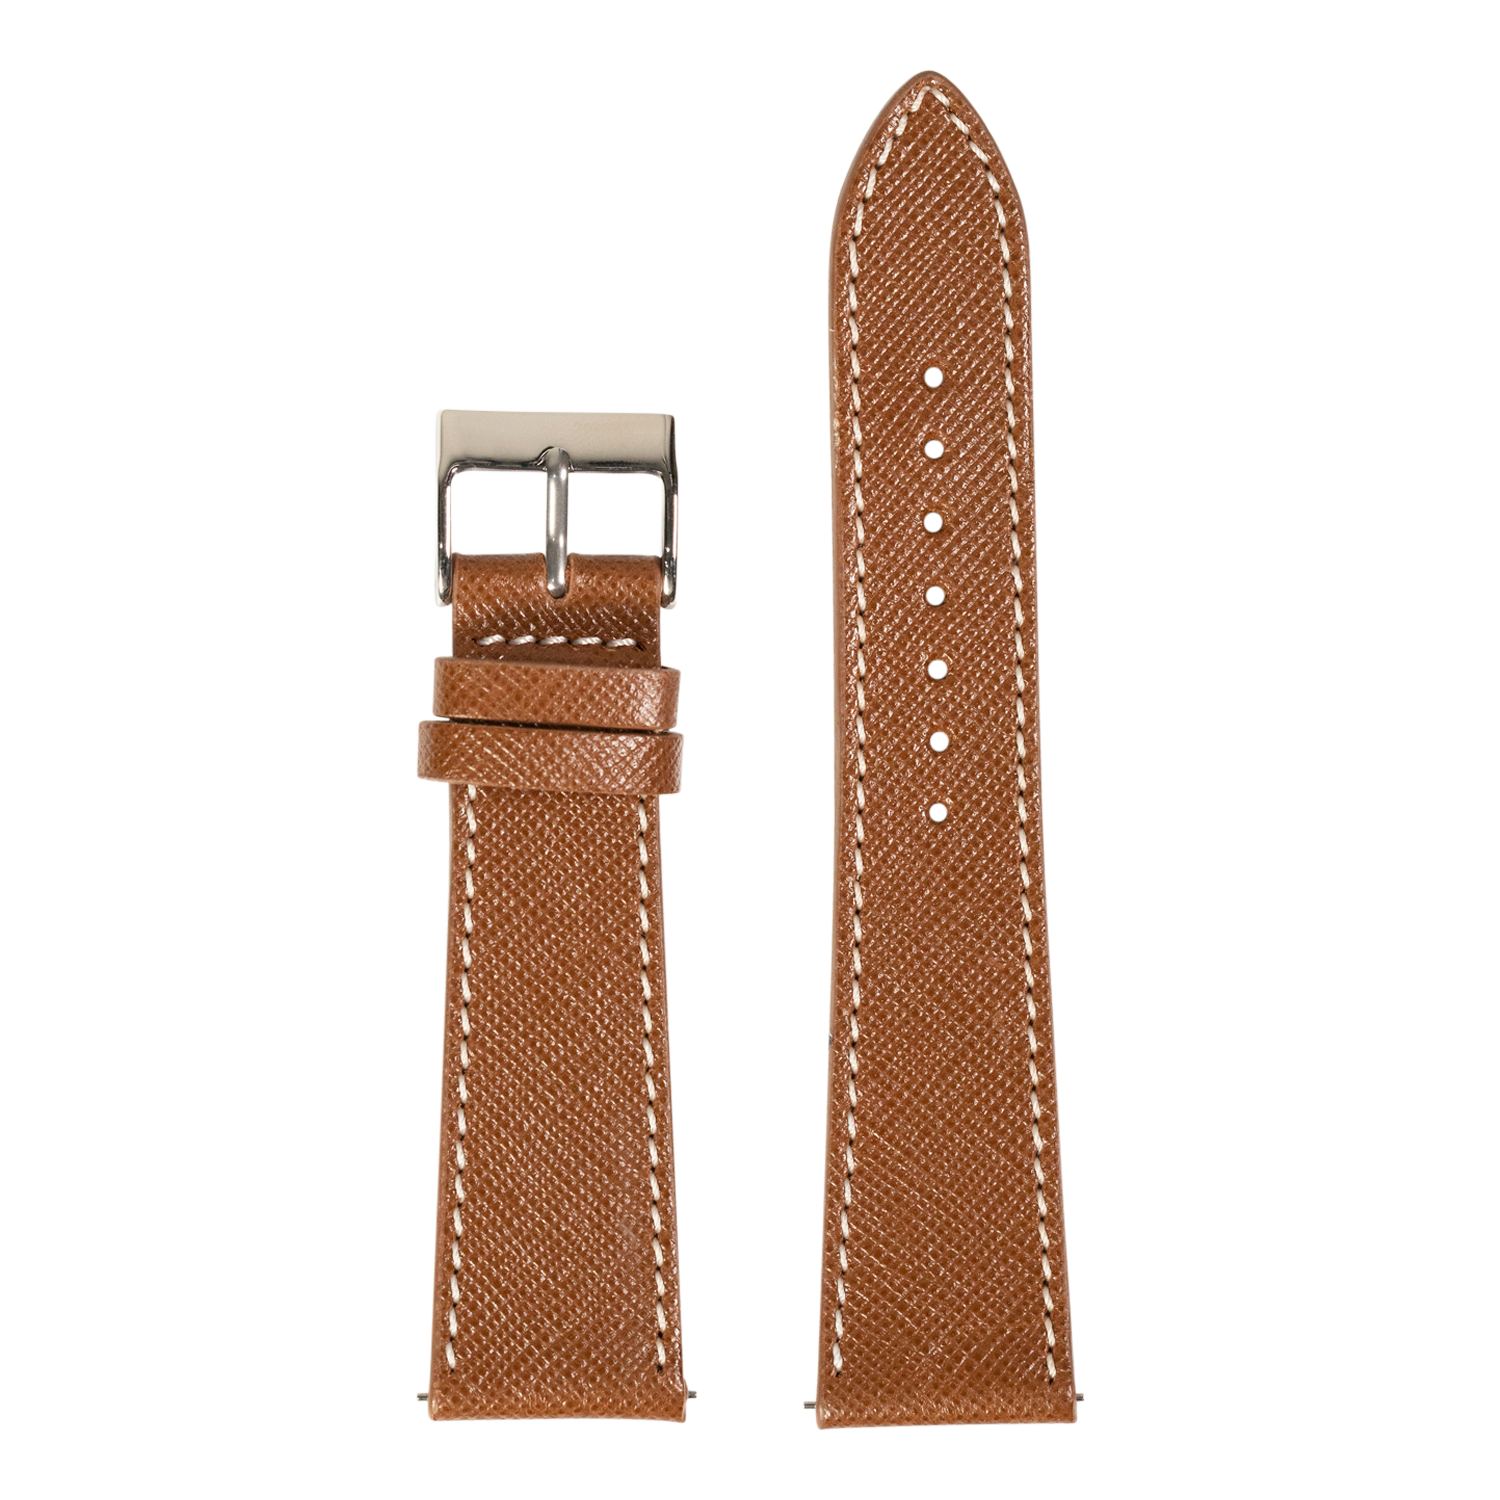 [Apple Watch] Saffiano Leather - Brown with White Stitching